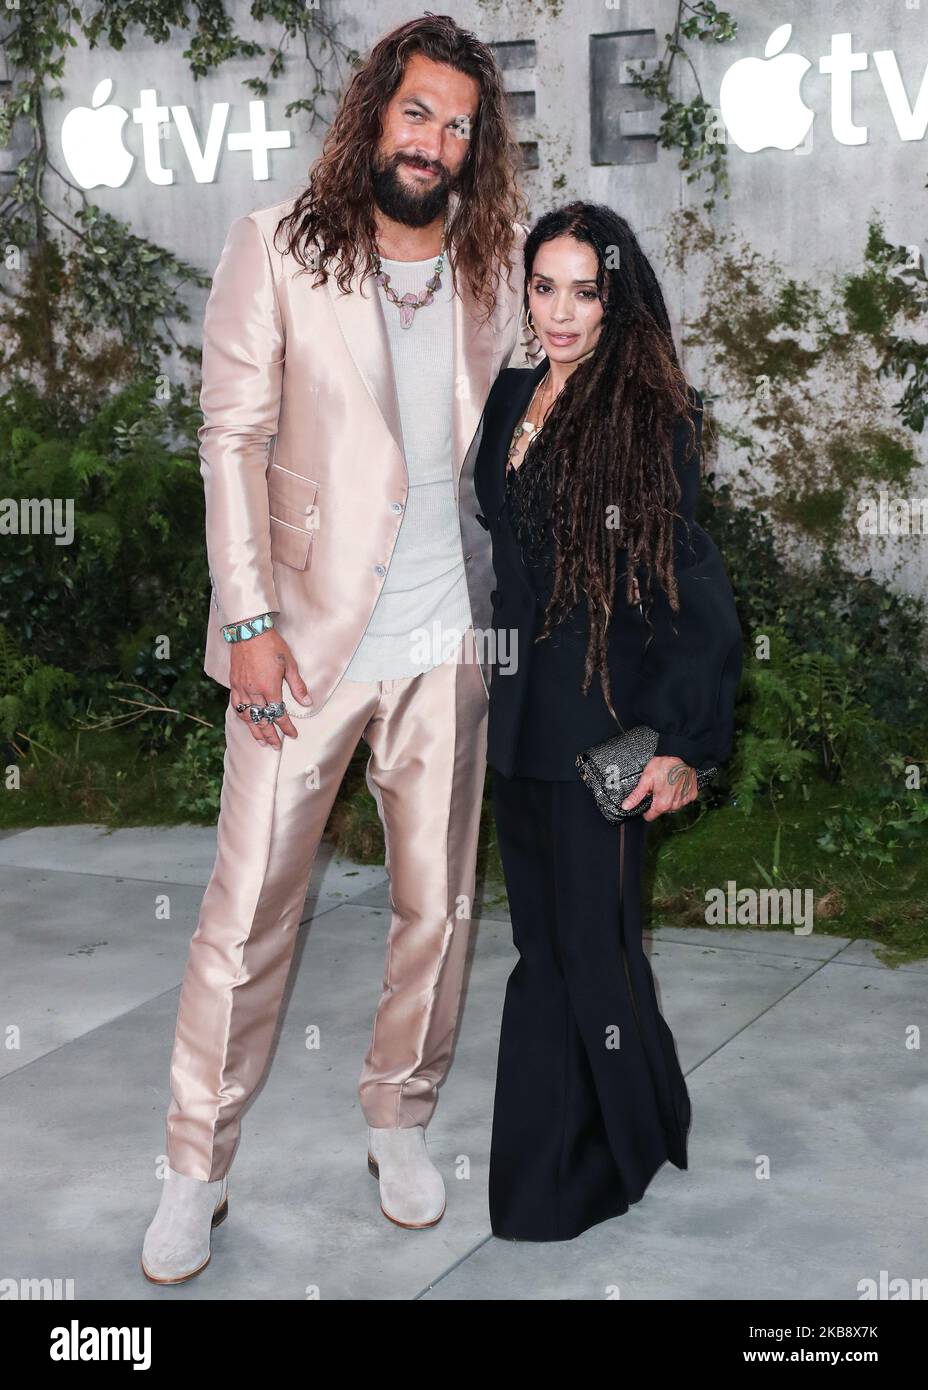 WESTWOOD, LOS ANGELES, CALIFORNIA, USA - OCTOBER 21: Actor Jason Momoa and wife/actress Lisa Bonet arrive at the World Premiere Of Apple TV+'s 'See' held at the Fox Village Theater on October 21, 2019 in Westwood, Los Angeles, California, United States. (Photo by Xavier Collin/Image Press Agency/NurPhoto) Stock Photo